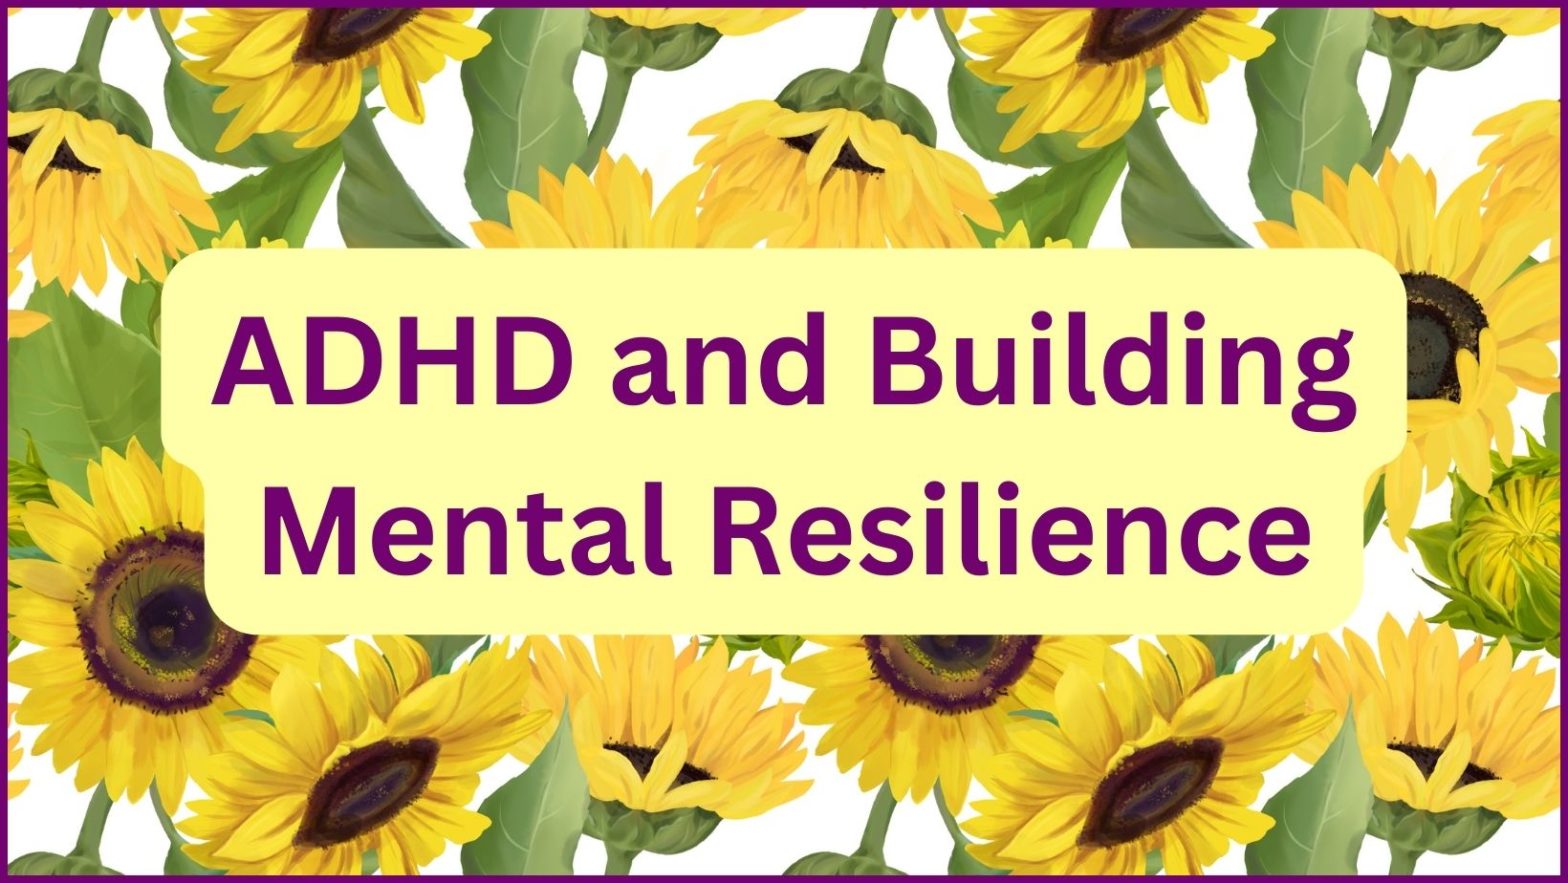 ADHD and Building Mental Resilience